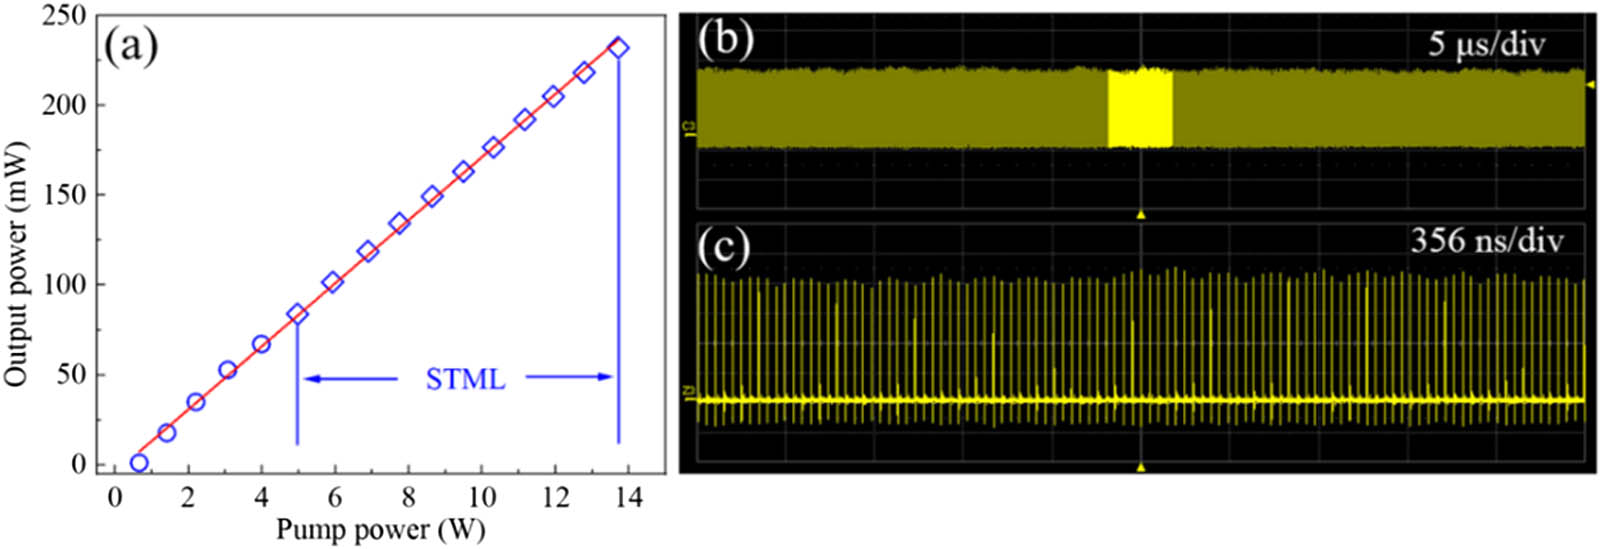 (a) Average output power versus pump power. The red line is a linear fit to show laser efficiency. STML, spatiotemporal mode-locking. The laser is in STML operation in the marked range. Typical pulse train under (b) 5 μs/div and (c) 356 ns/div monitored by the oscilloscope at a pump power of 8.6 W.